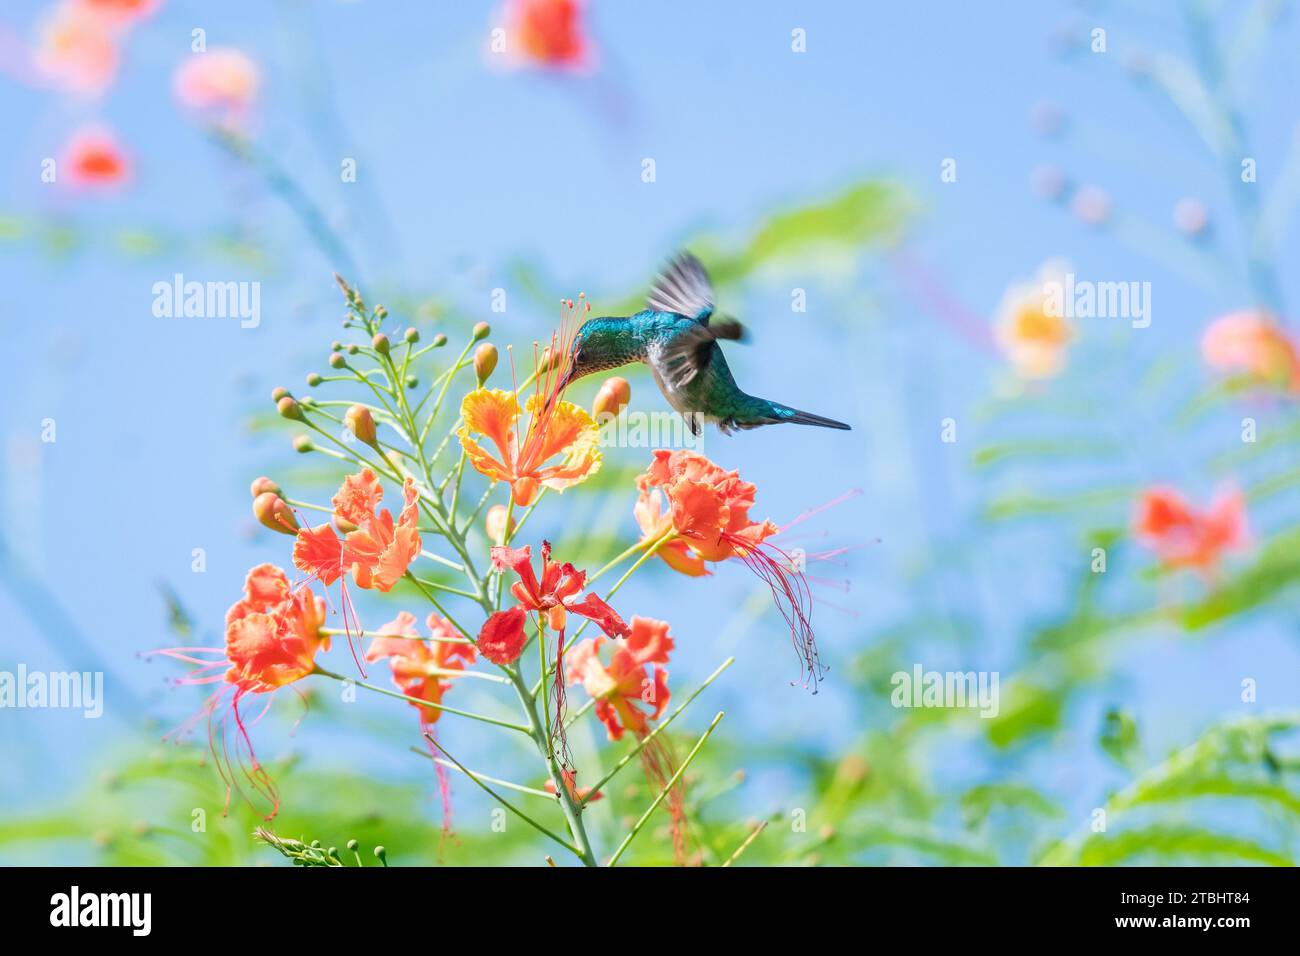 Blue-chinned Sapphire hummingbird, Chlorestes Notata, pollinating tropical orange Pride of Barbados flowers glittering in the sunlight Stock Photo